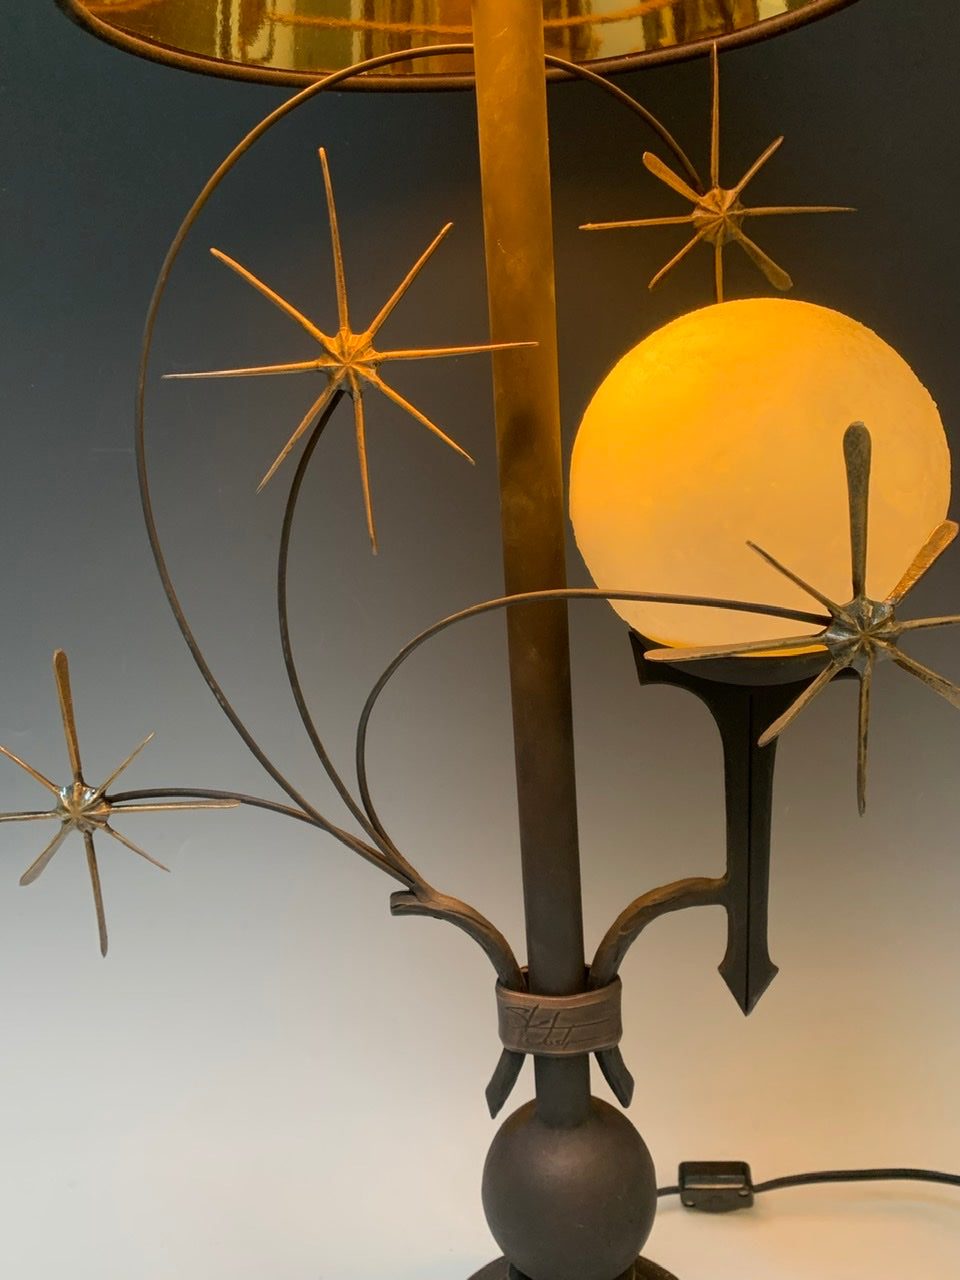 Handmade Moon and Star Table Lamp with Black Shade